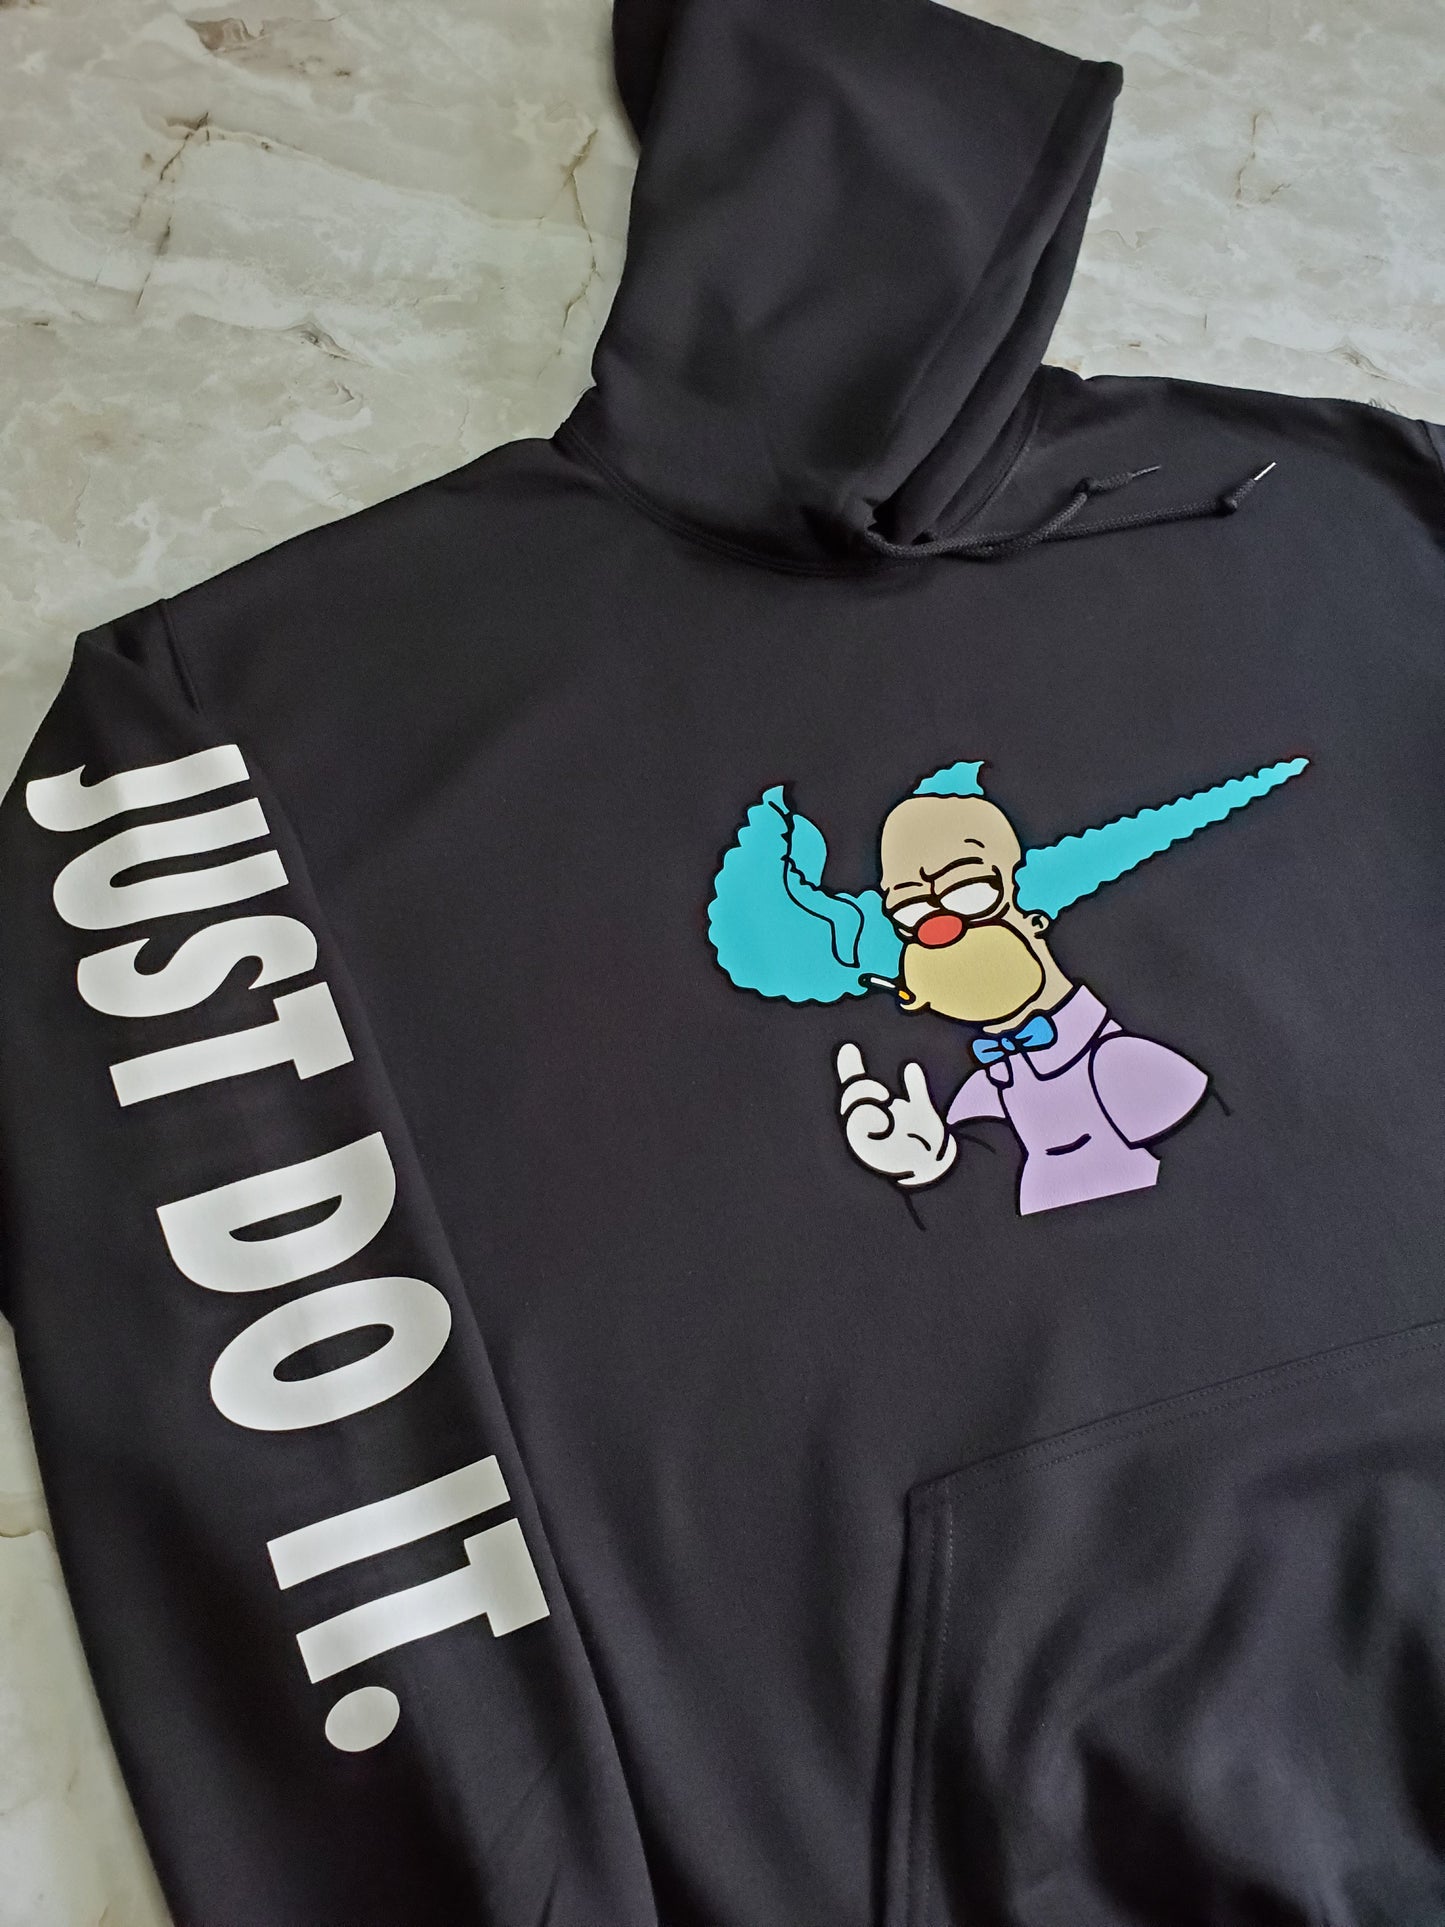 JUST KRUSTY Hoodie - Centre Ave Clothing Co.